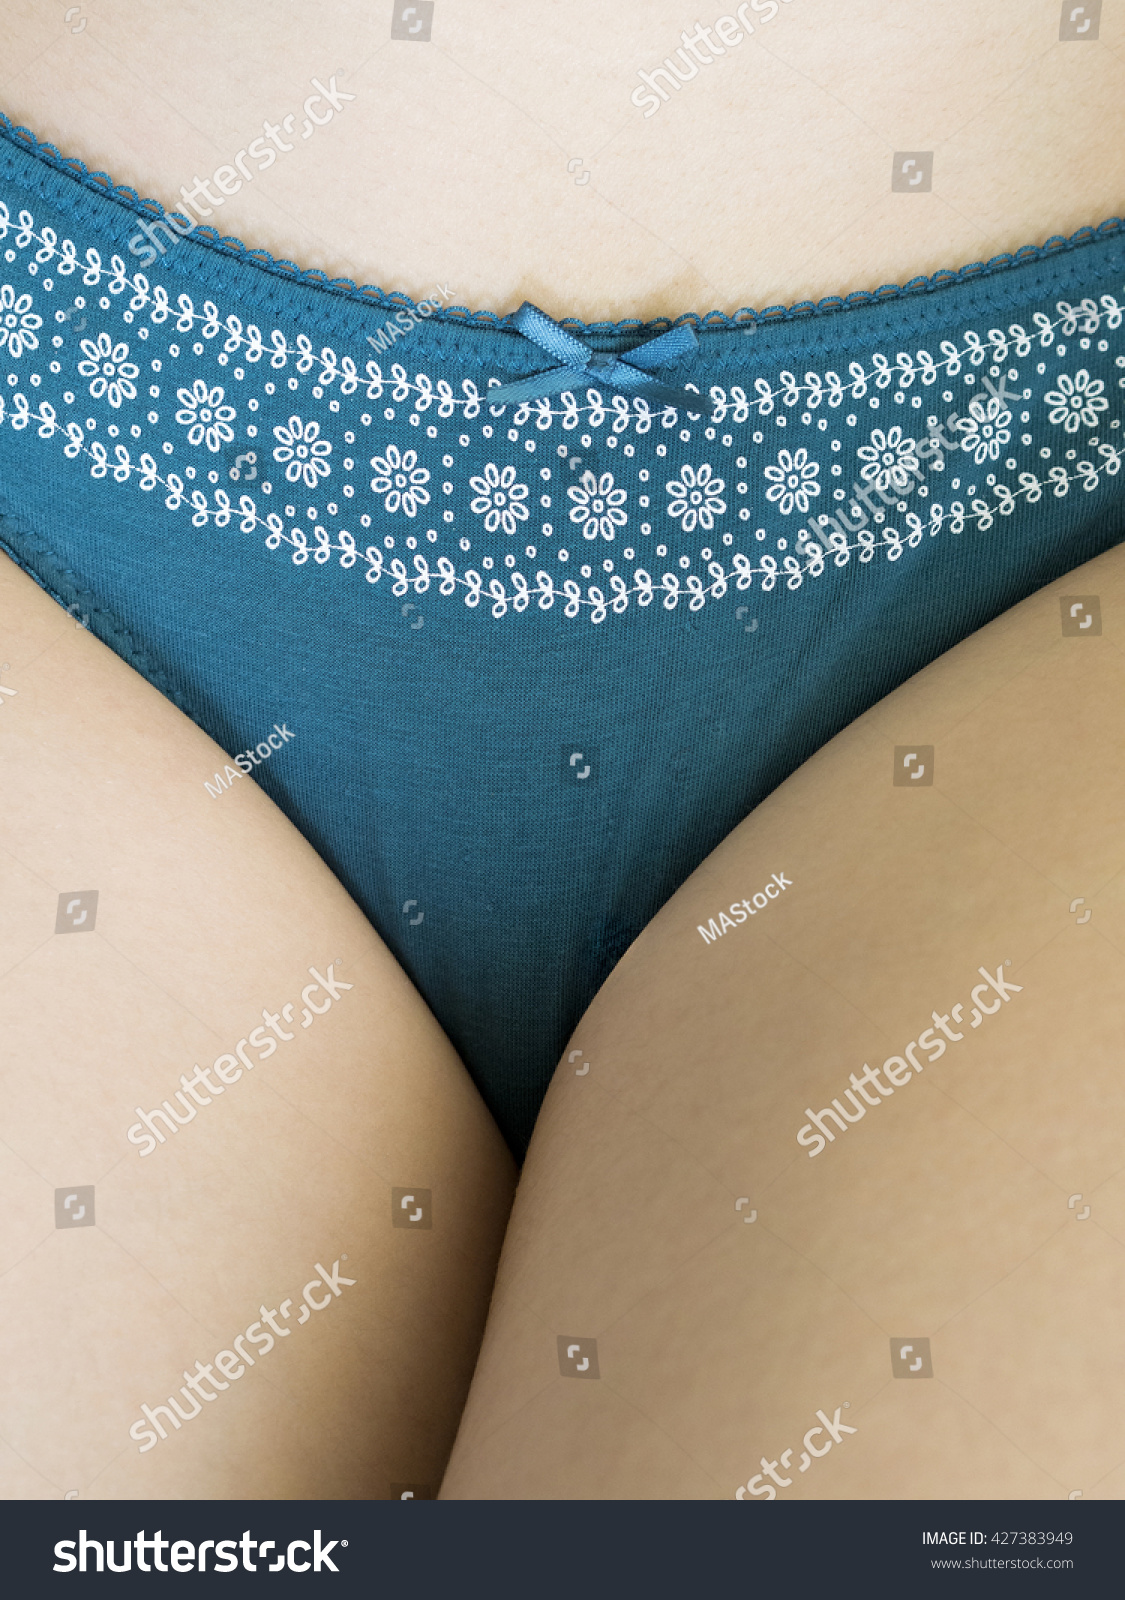 don rayburn recommends panties close up pic